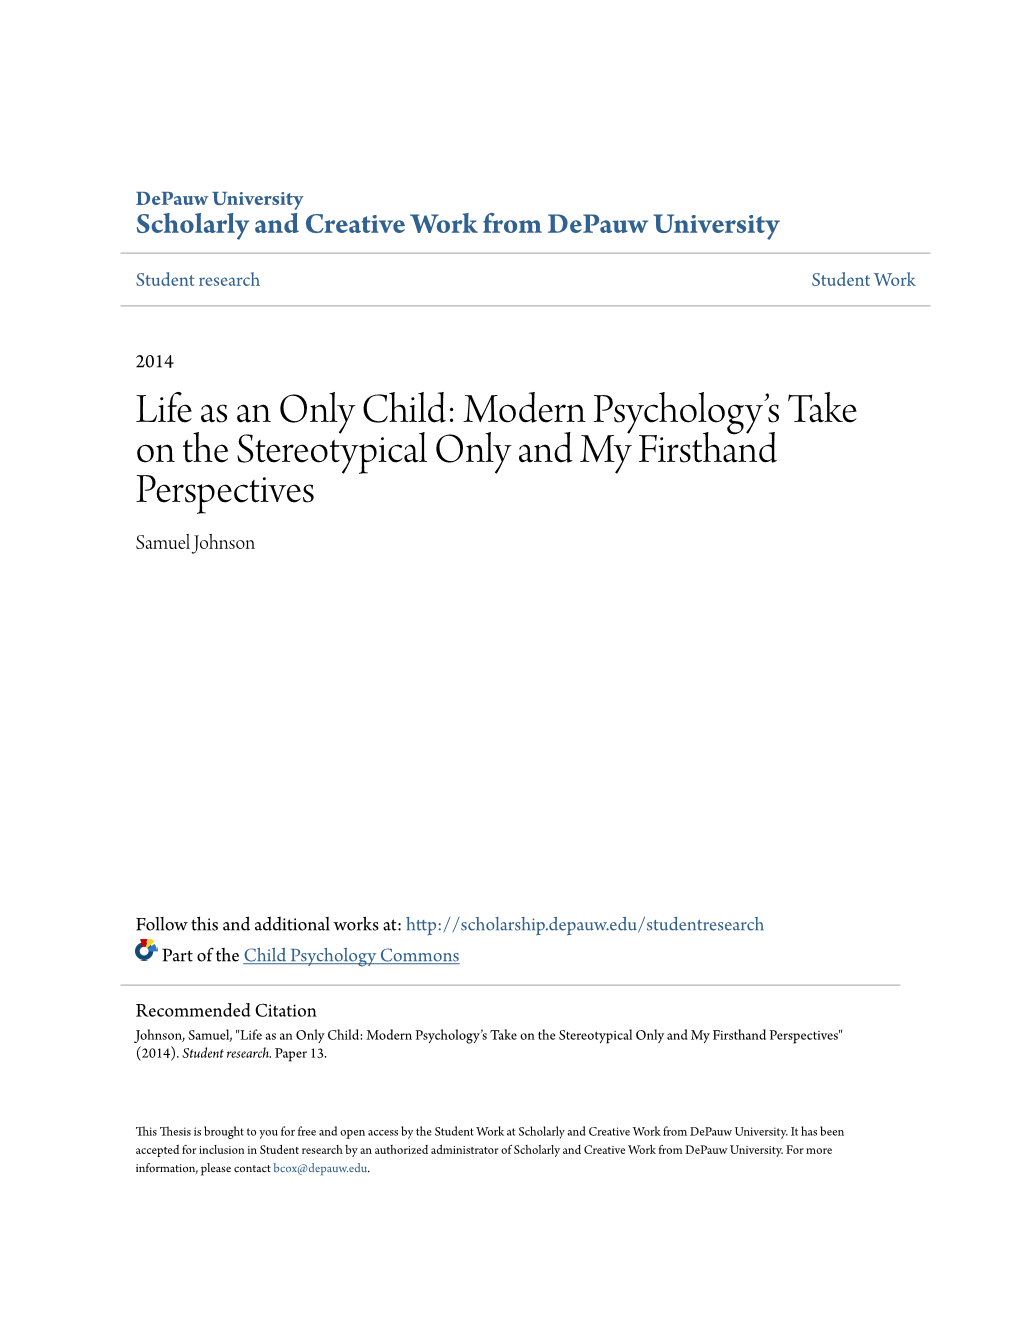 Life As an Only Child: Modern Psychology's Take on The